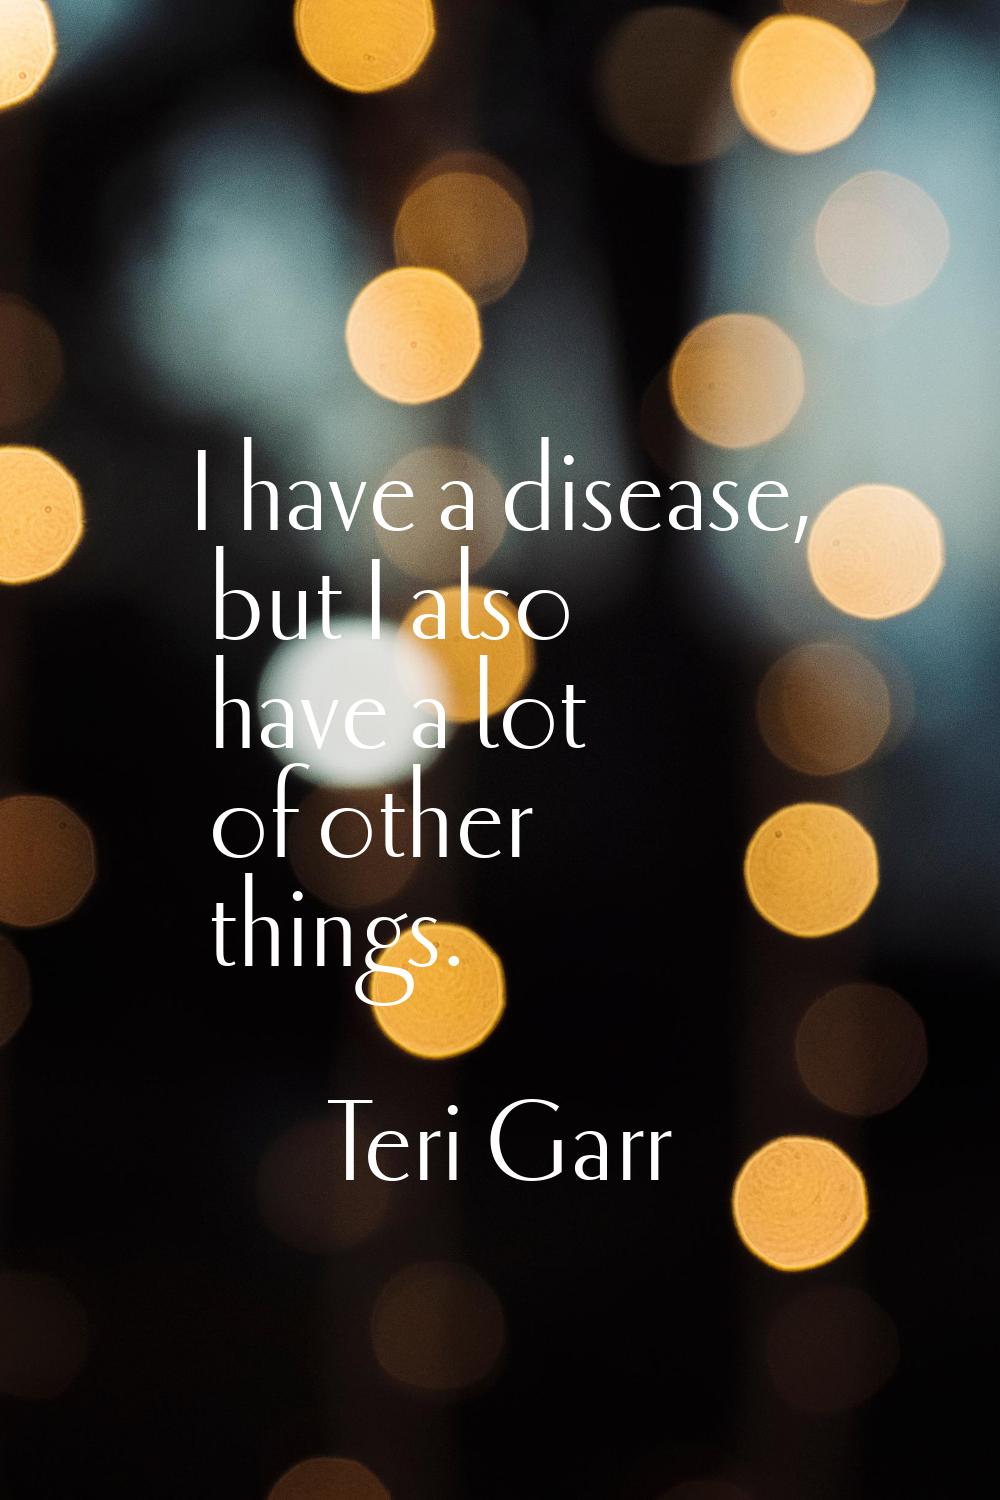 I have a disease, but I also have a lot of other things.